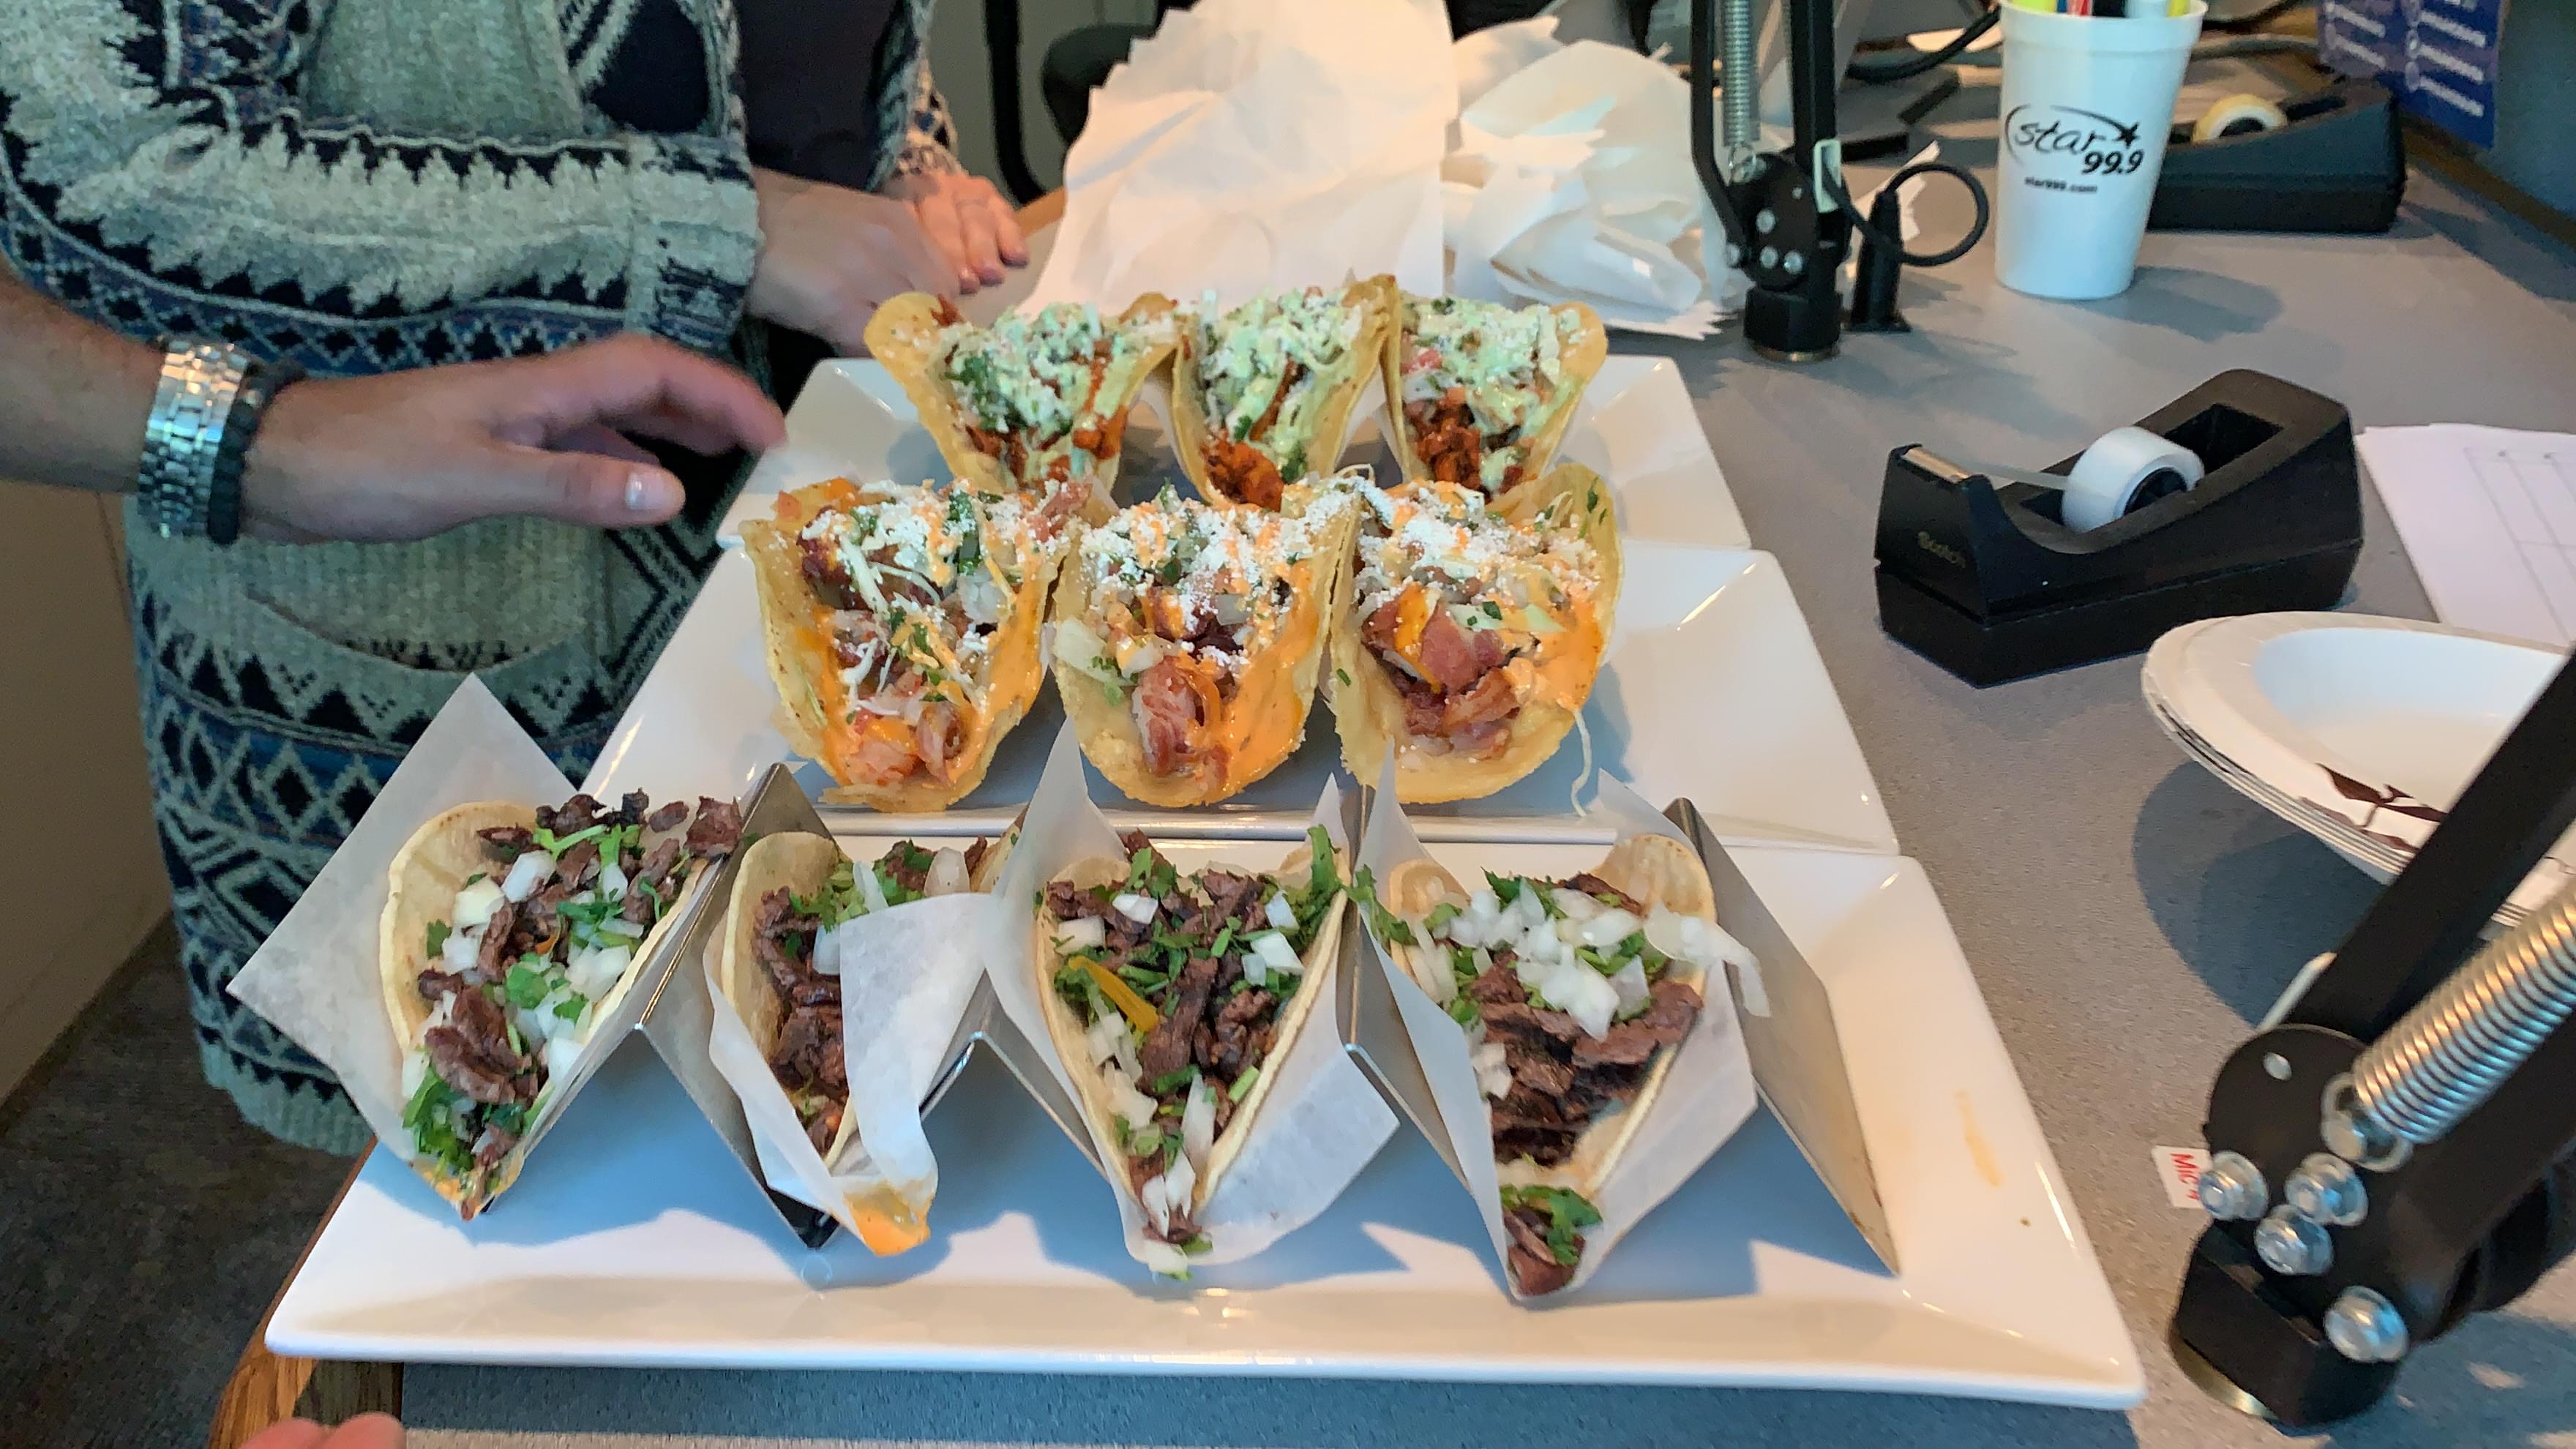 60 Seconds Behind the Scenes- National Taco Day from Puerta Vallarta in Fairfield!